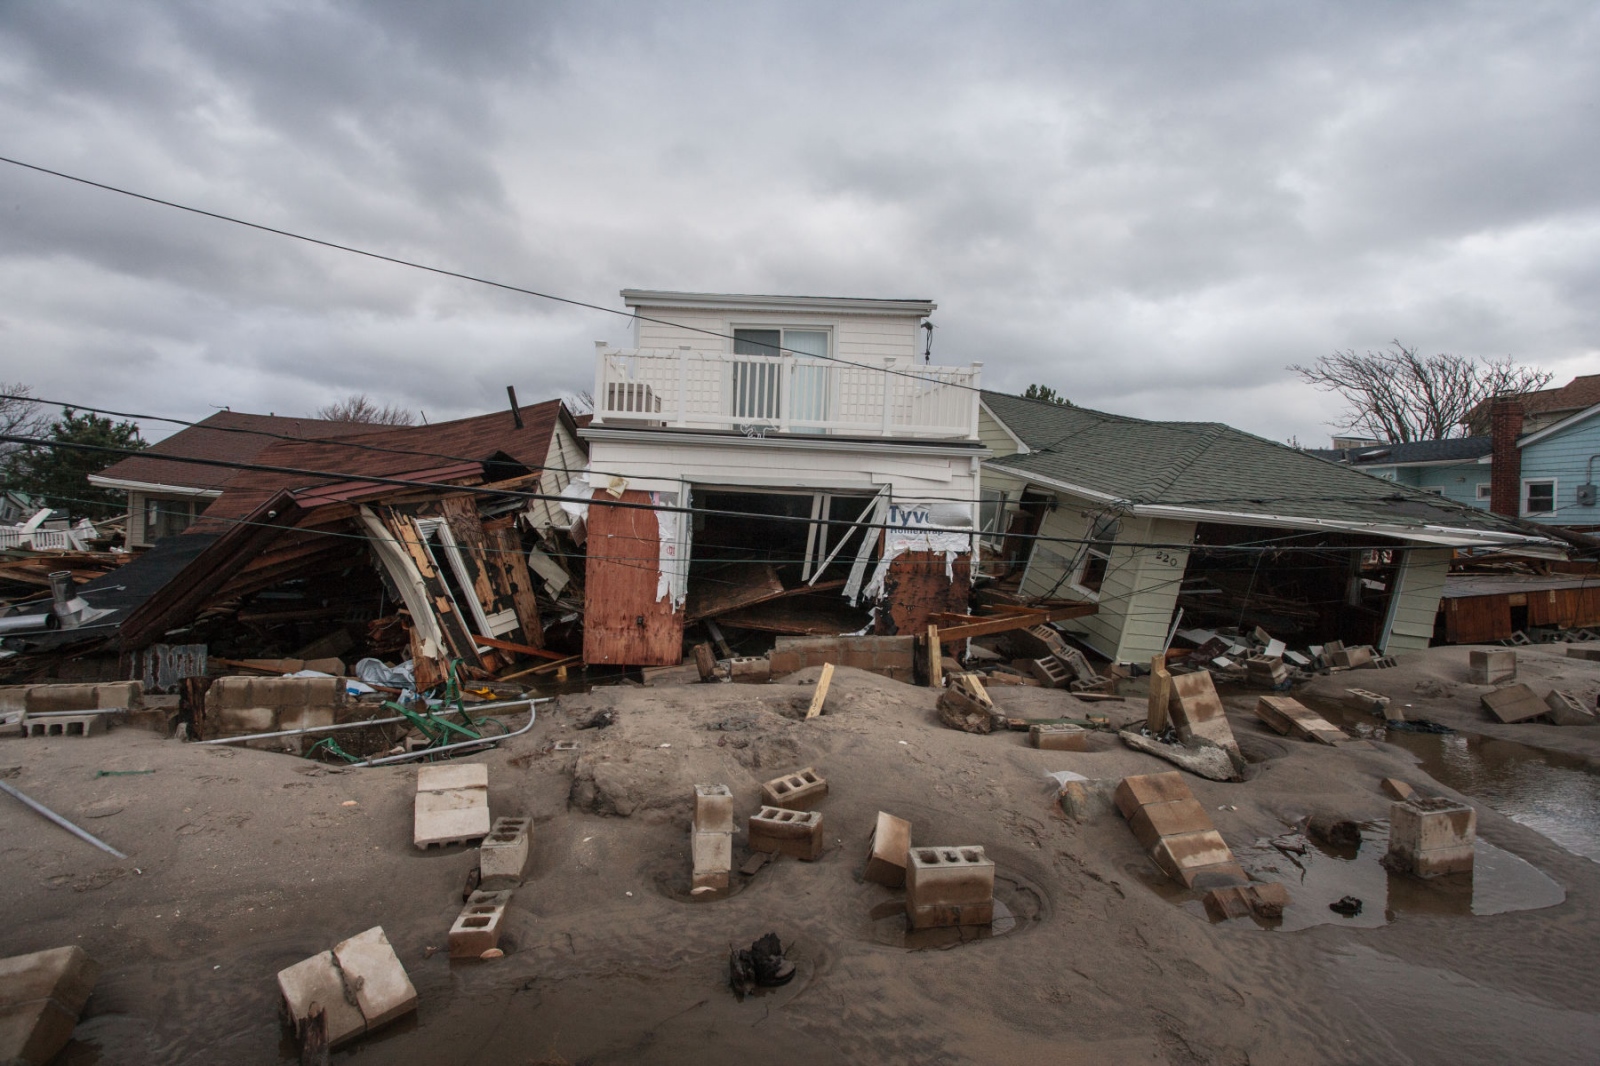 The Rockaways After Hurricane Sandy - Destroyed house in Breezy Point after Hurricane Sandy. 